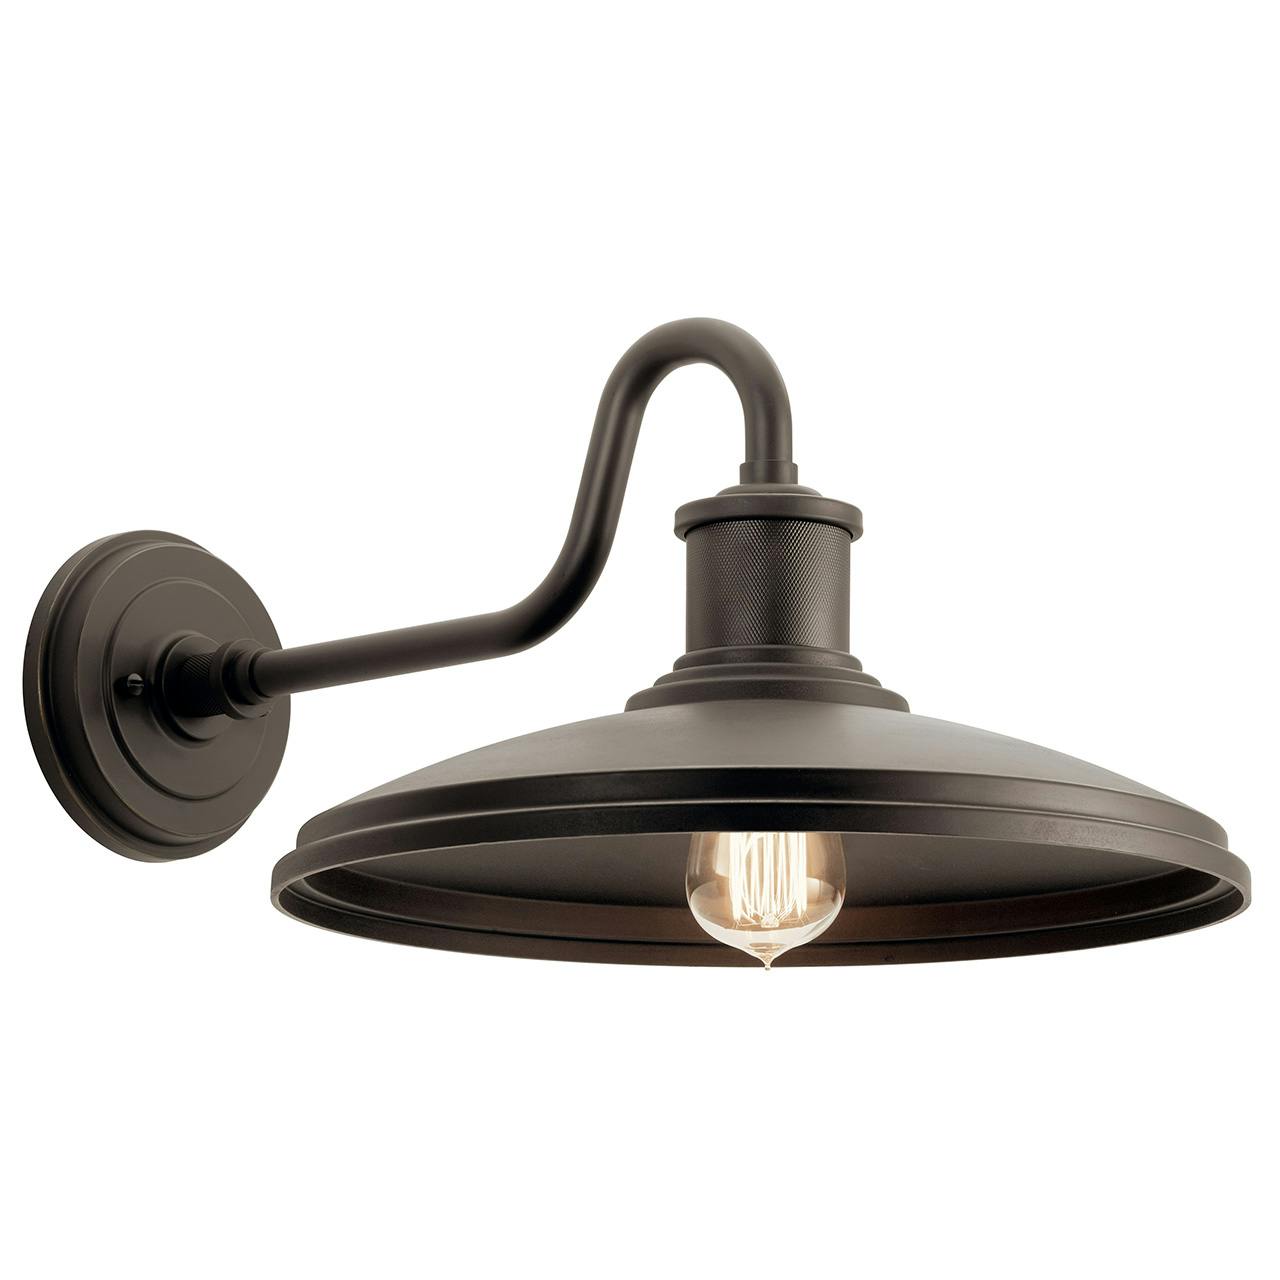 Allenbury 14" Wall Light Old Bronze on a white background